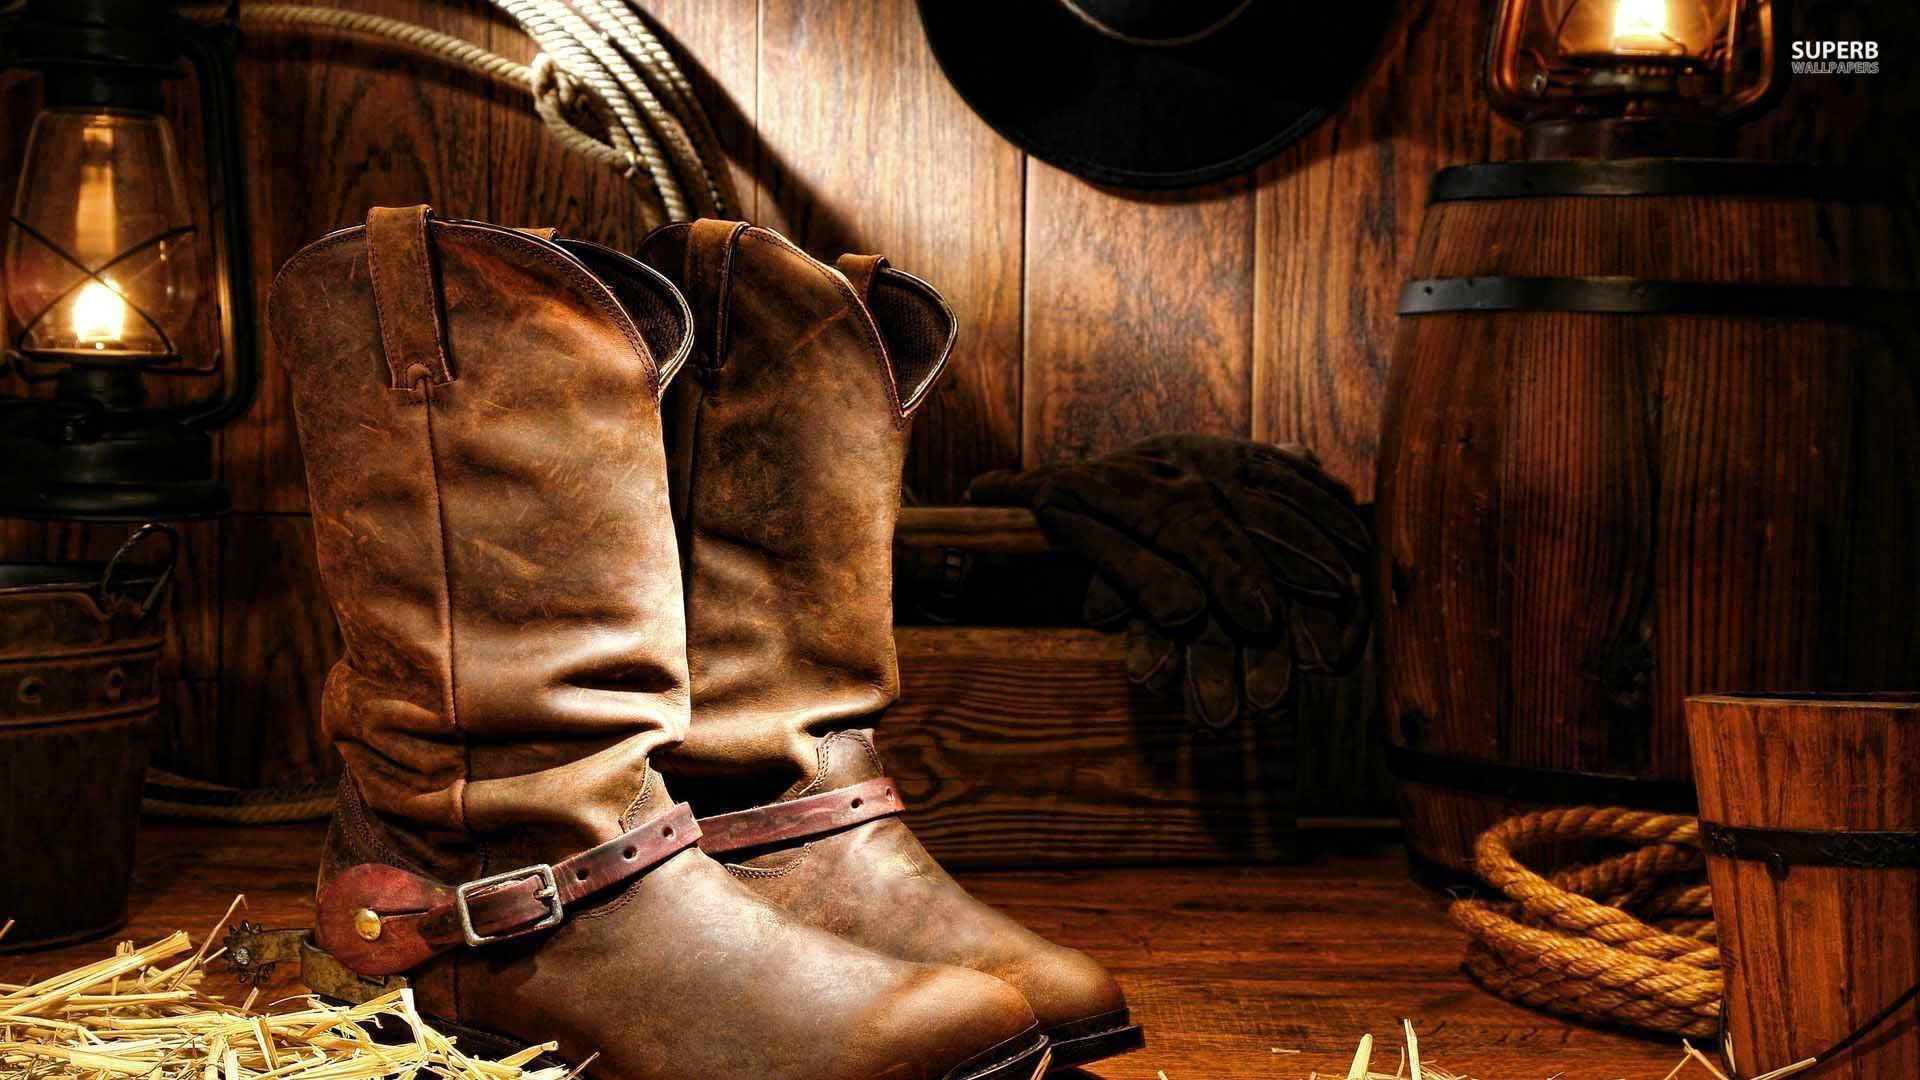 1920x1080 cowboy boots desktop wallpapers u daily backgrounds in hd with country  western backgrounds